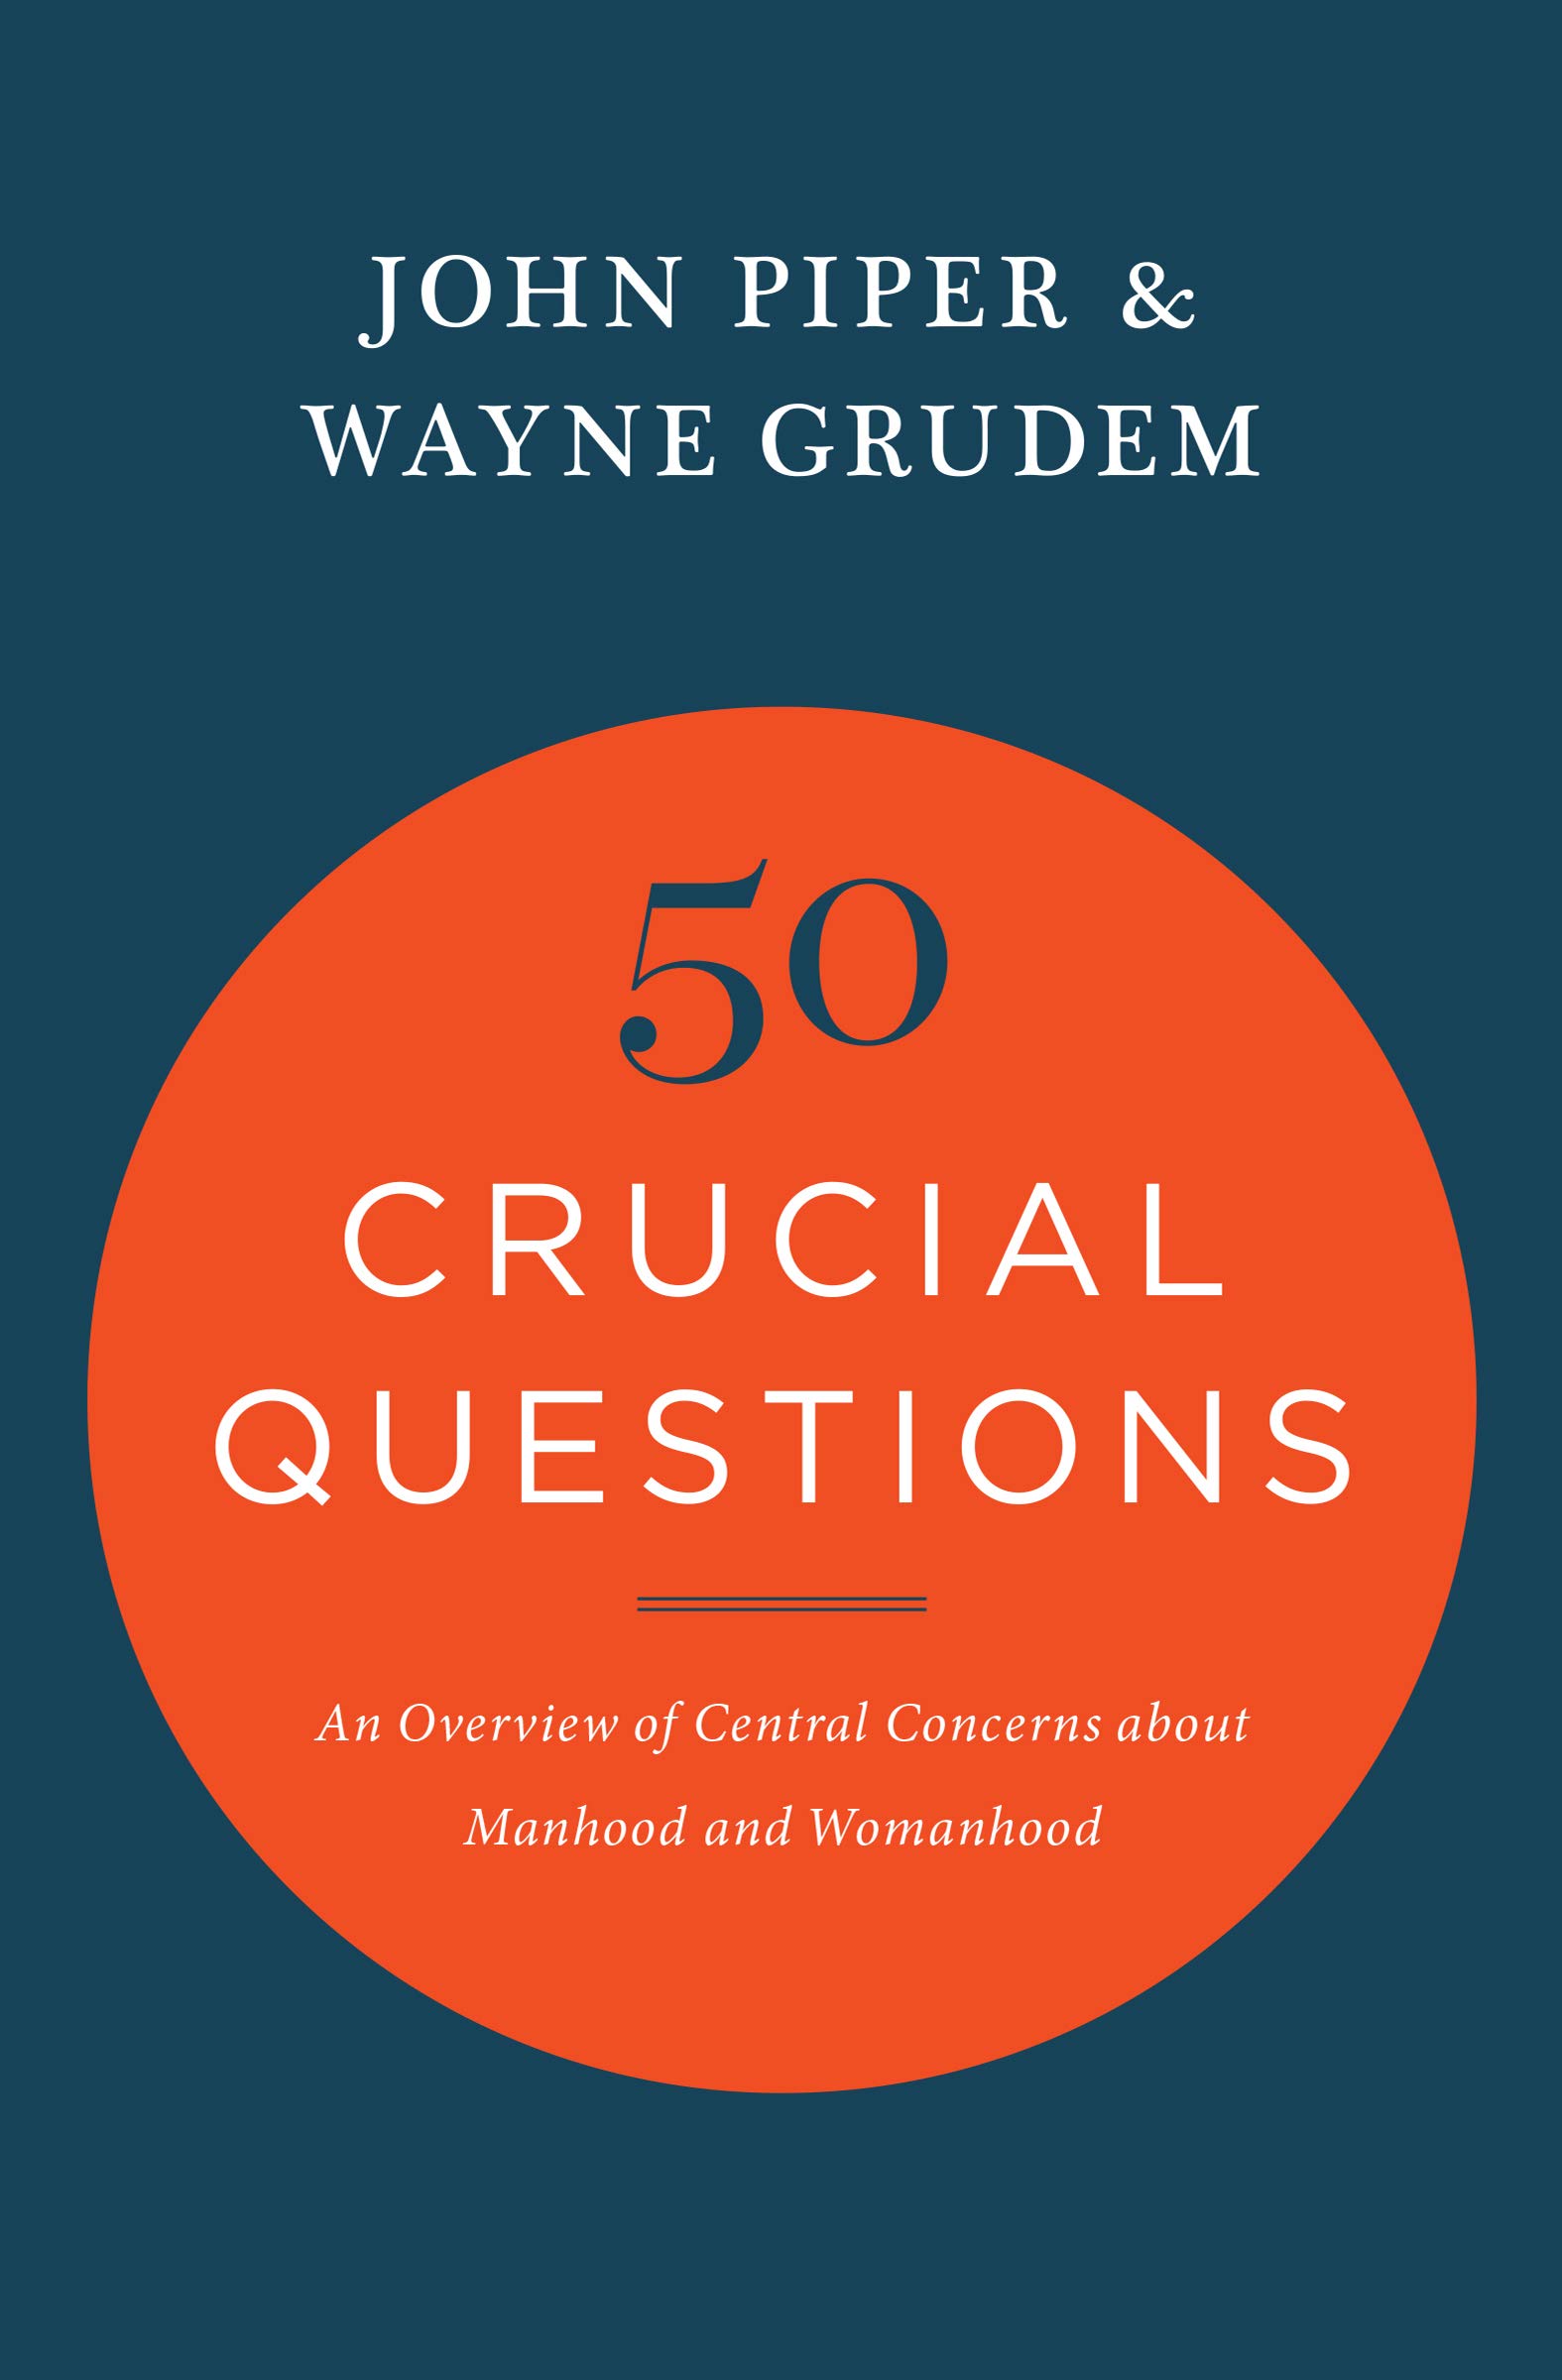 50 Crucial Questions About Manhood and Womanhood